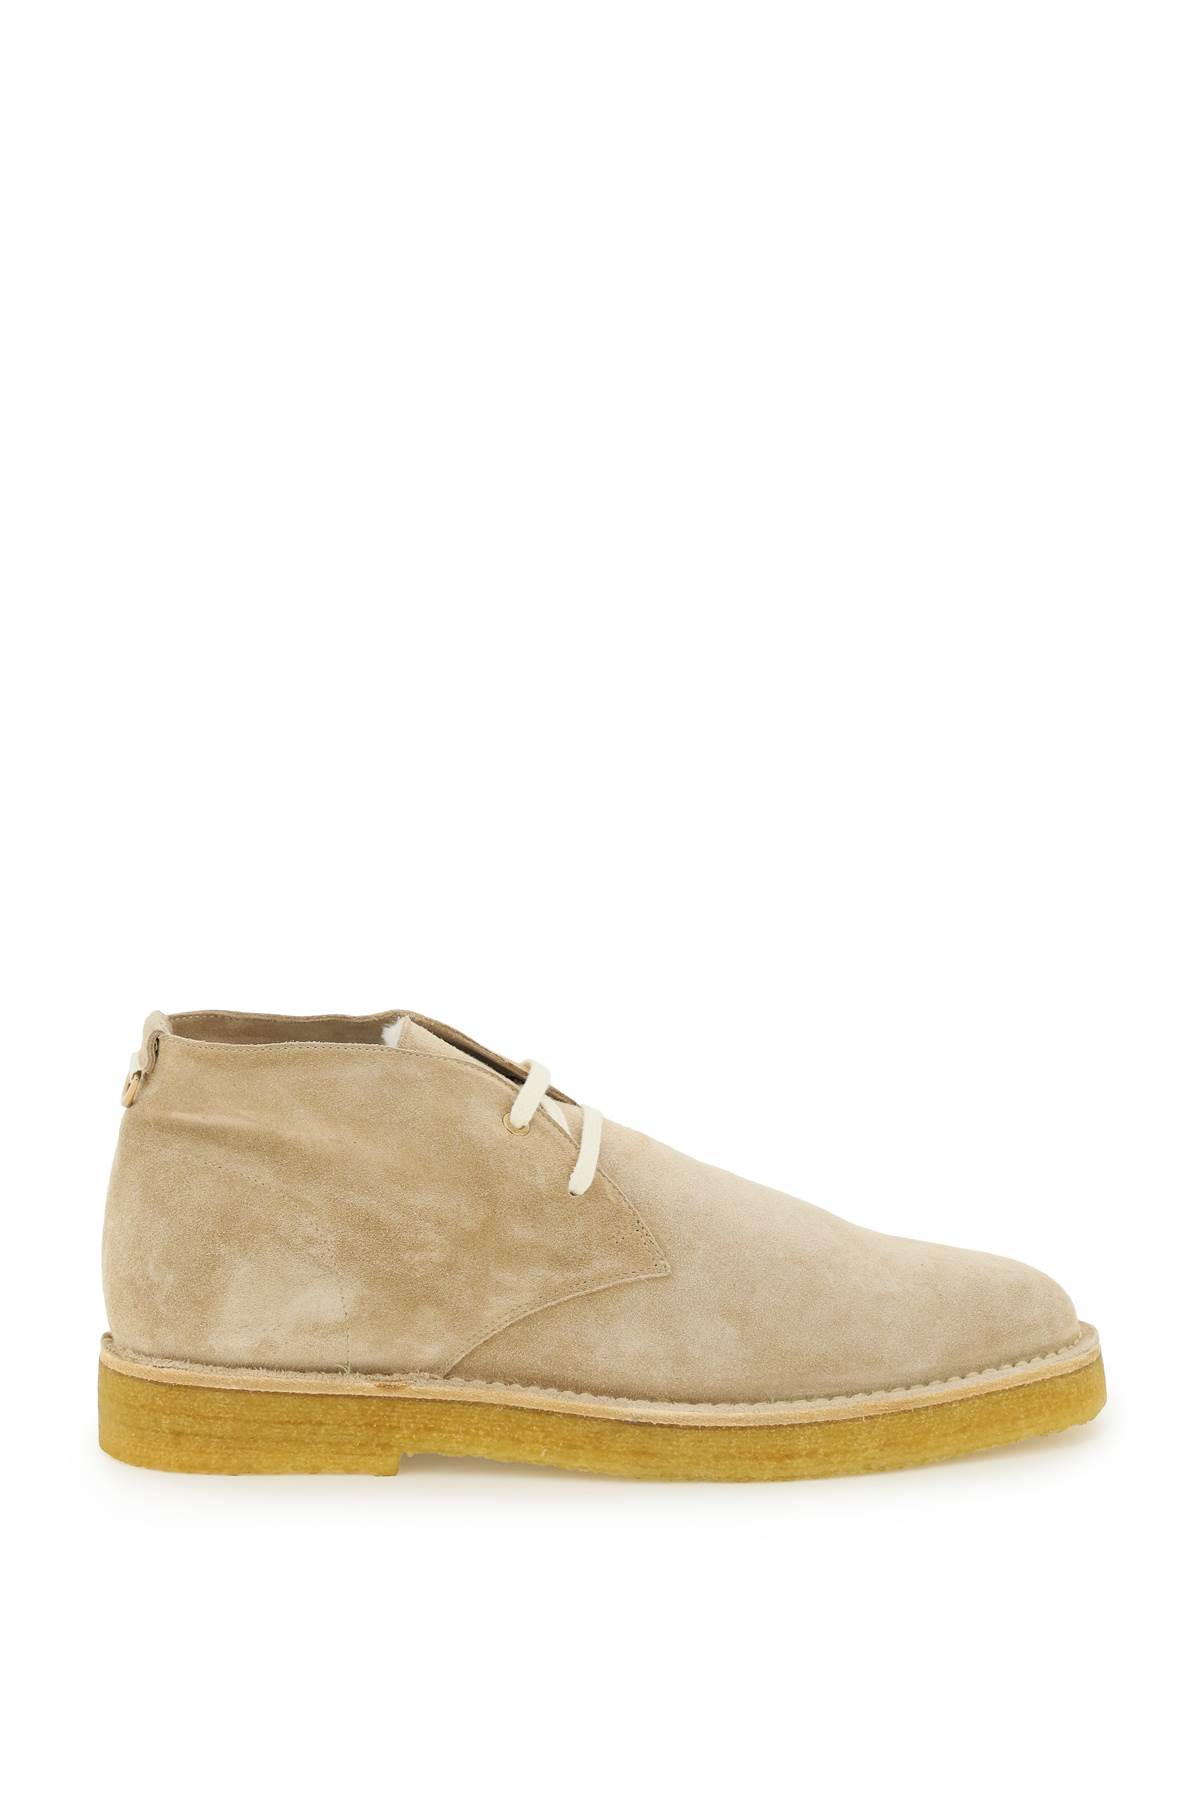 AGNONA SUEDE LEATHER CHUKKA LACE-UP SHOES